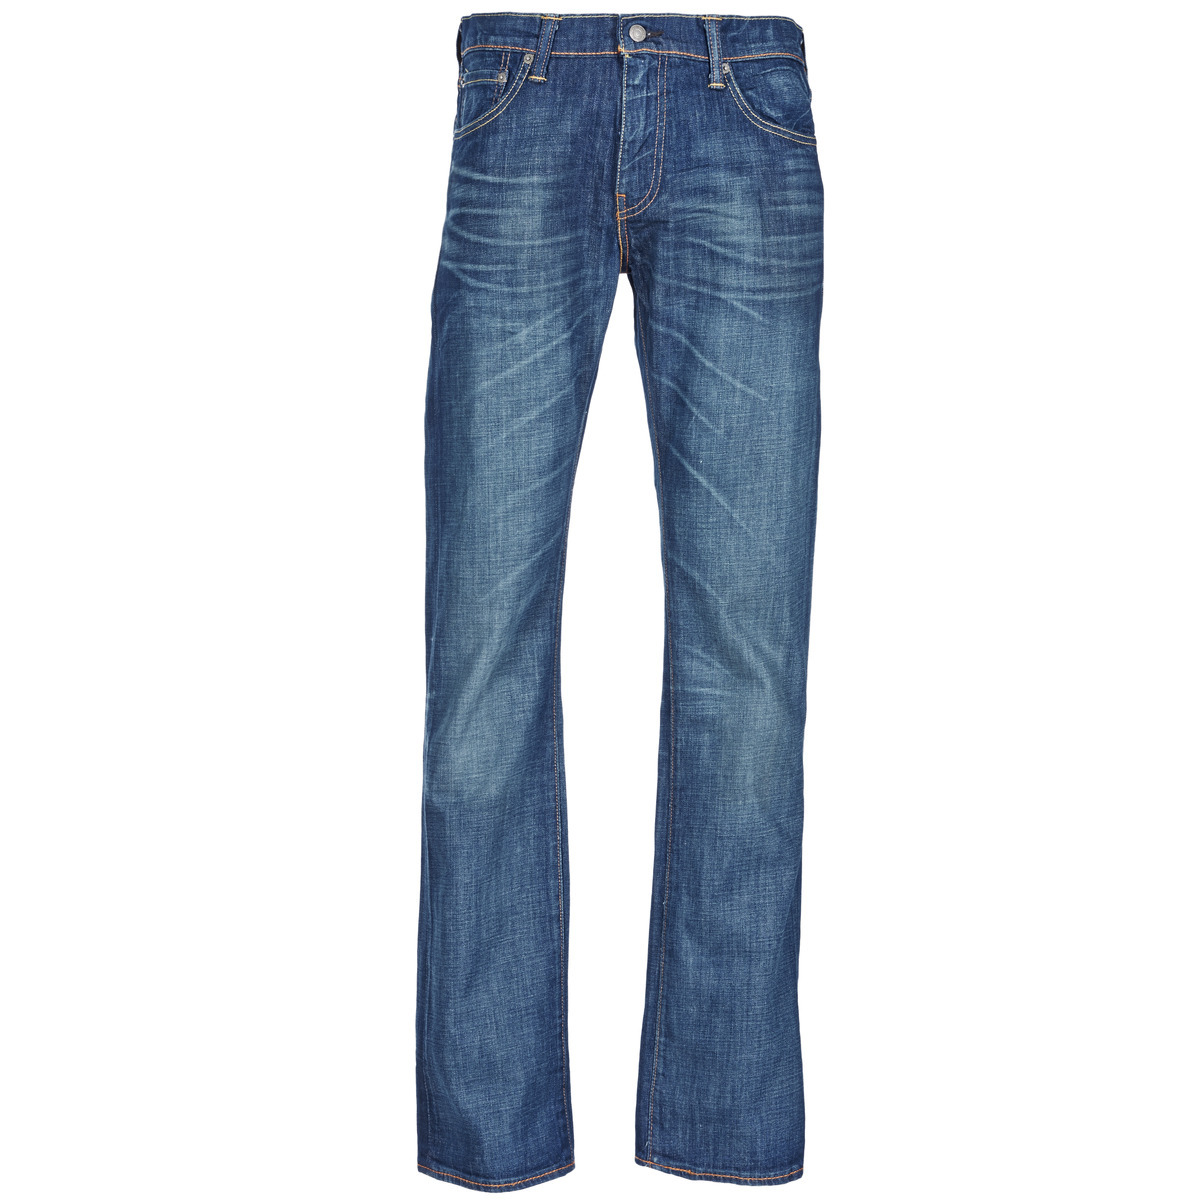 Gent Bootcut Jeans in Blue by Spartoo GOOFASH